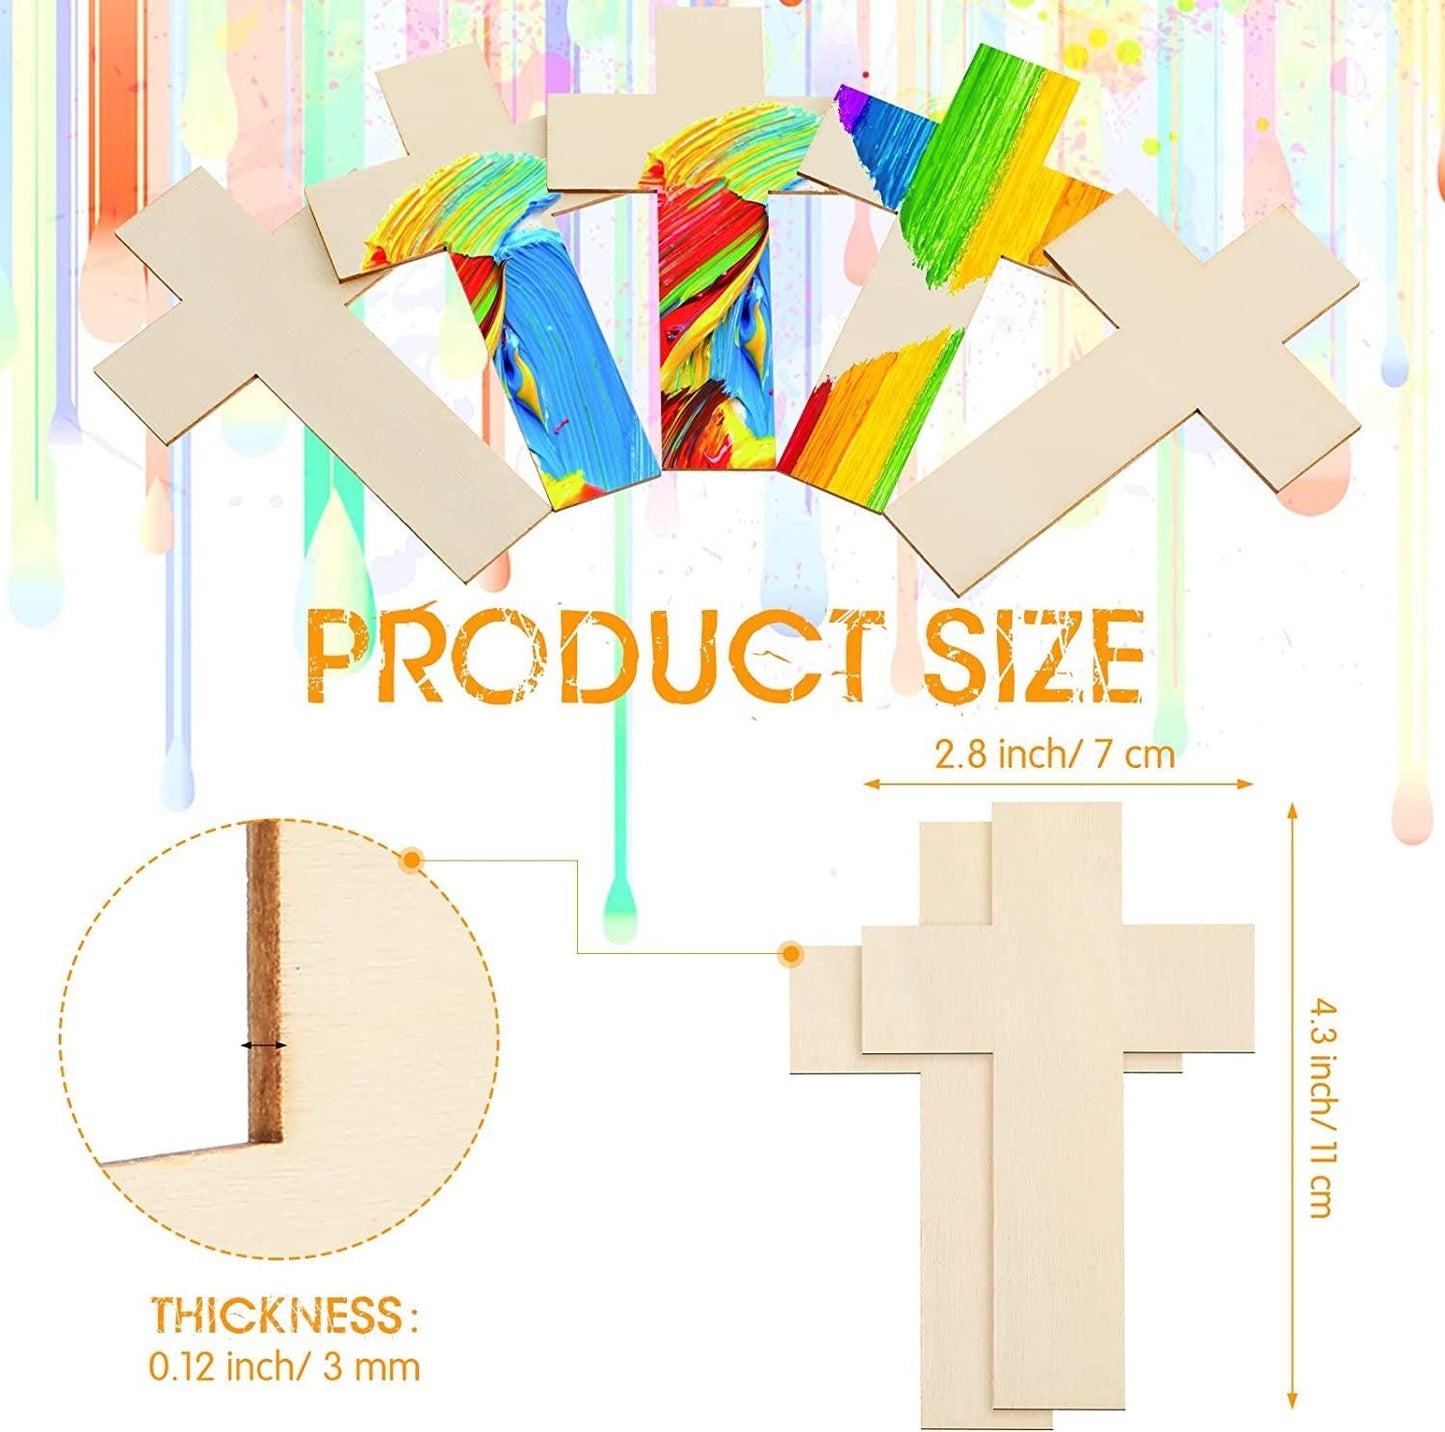 100 Pack Blank Wooden Cross Unfinished Cross Shaped Wood Cutouts for Crafts Wood Cross for DIY Projects Sunday School Church Home Decoration Ornaments, 11 X 7 Cm/ 4.3 X 2.8 Inches - WoodArtSupply